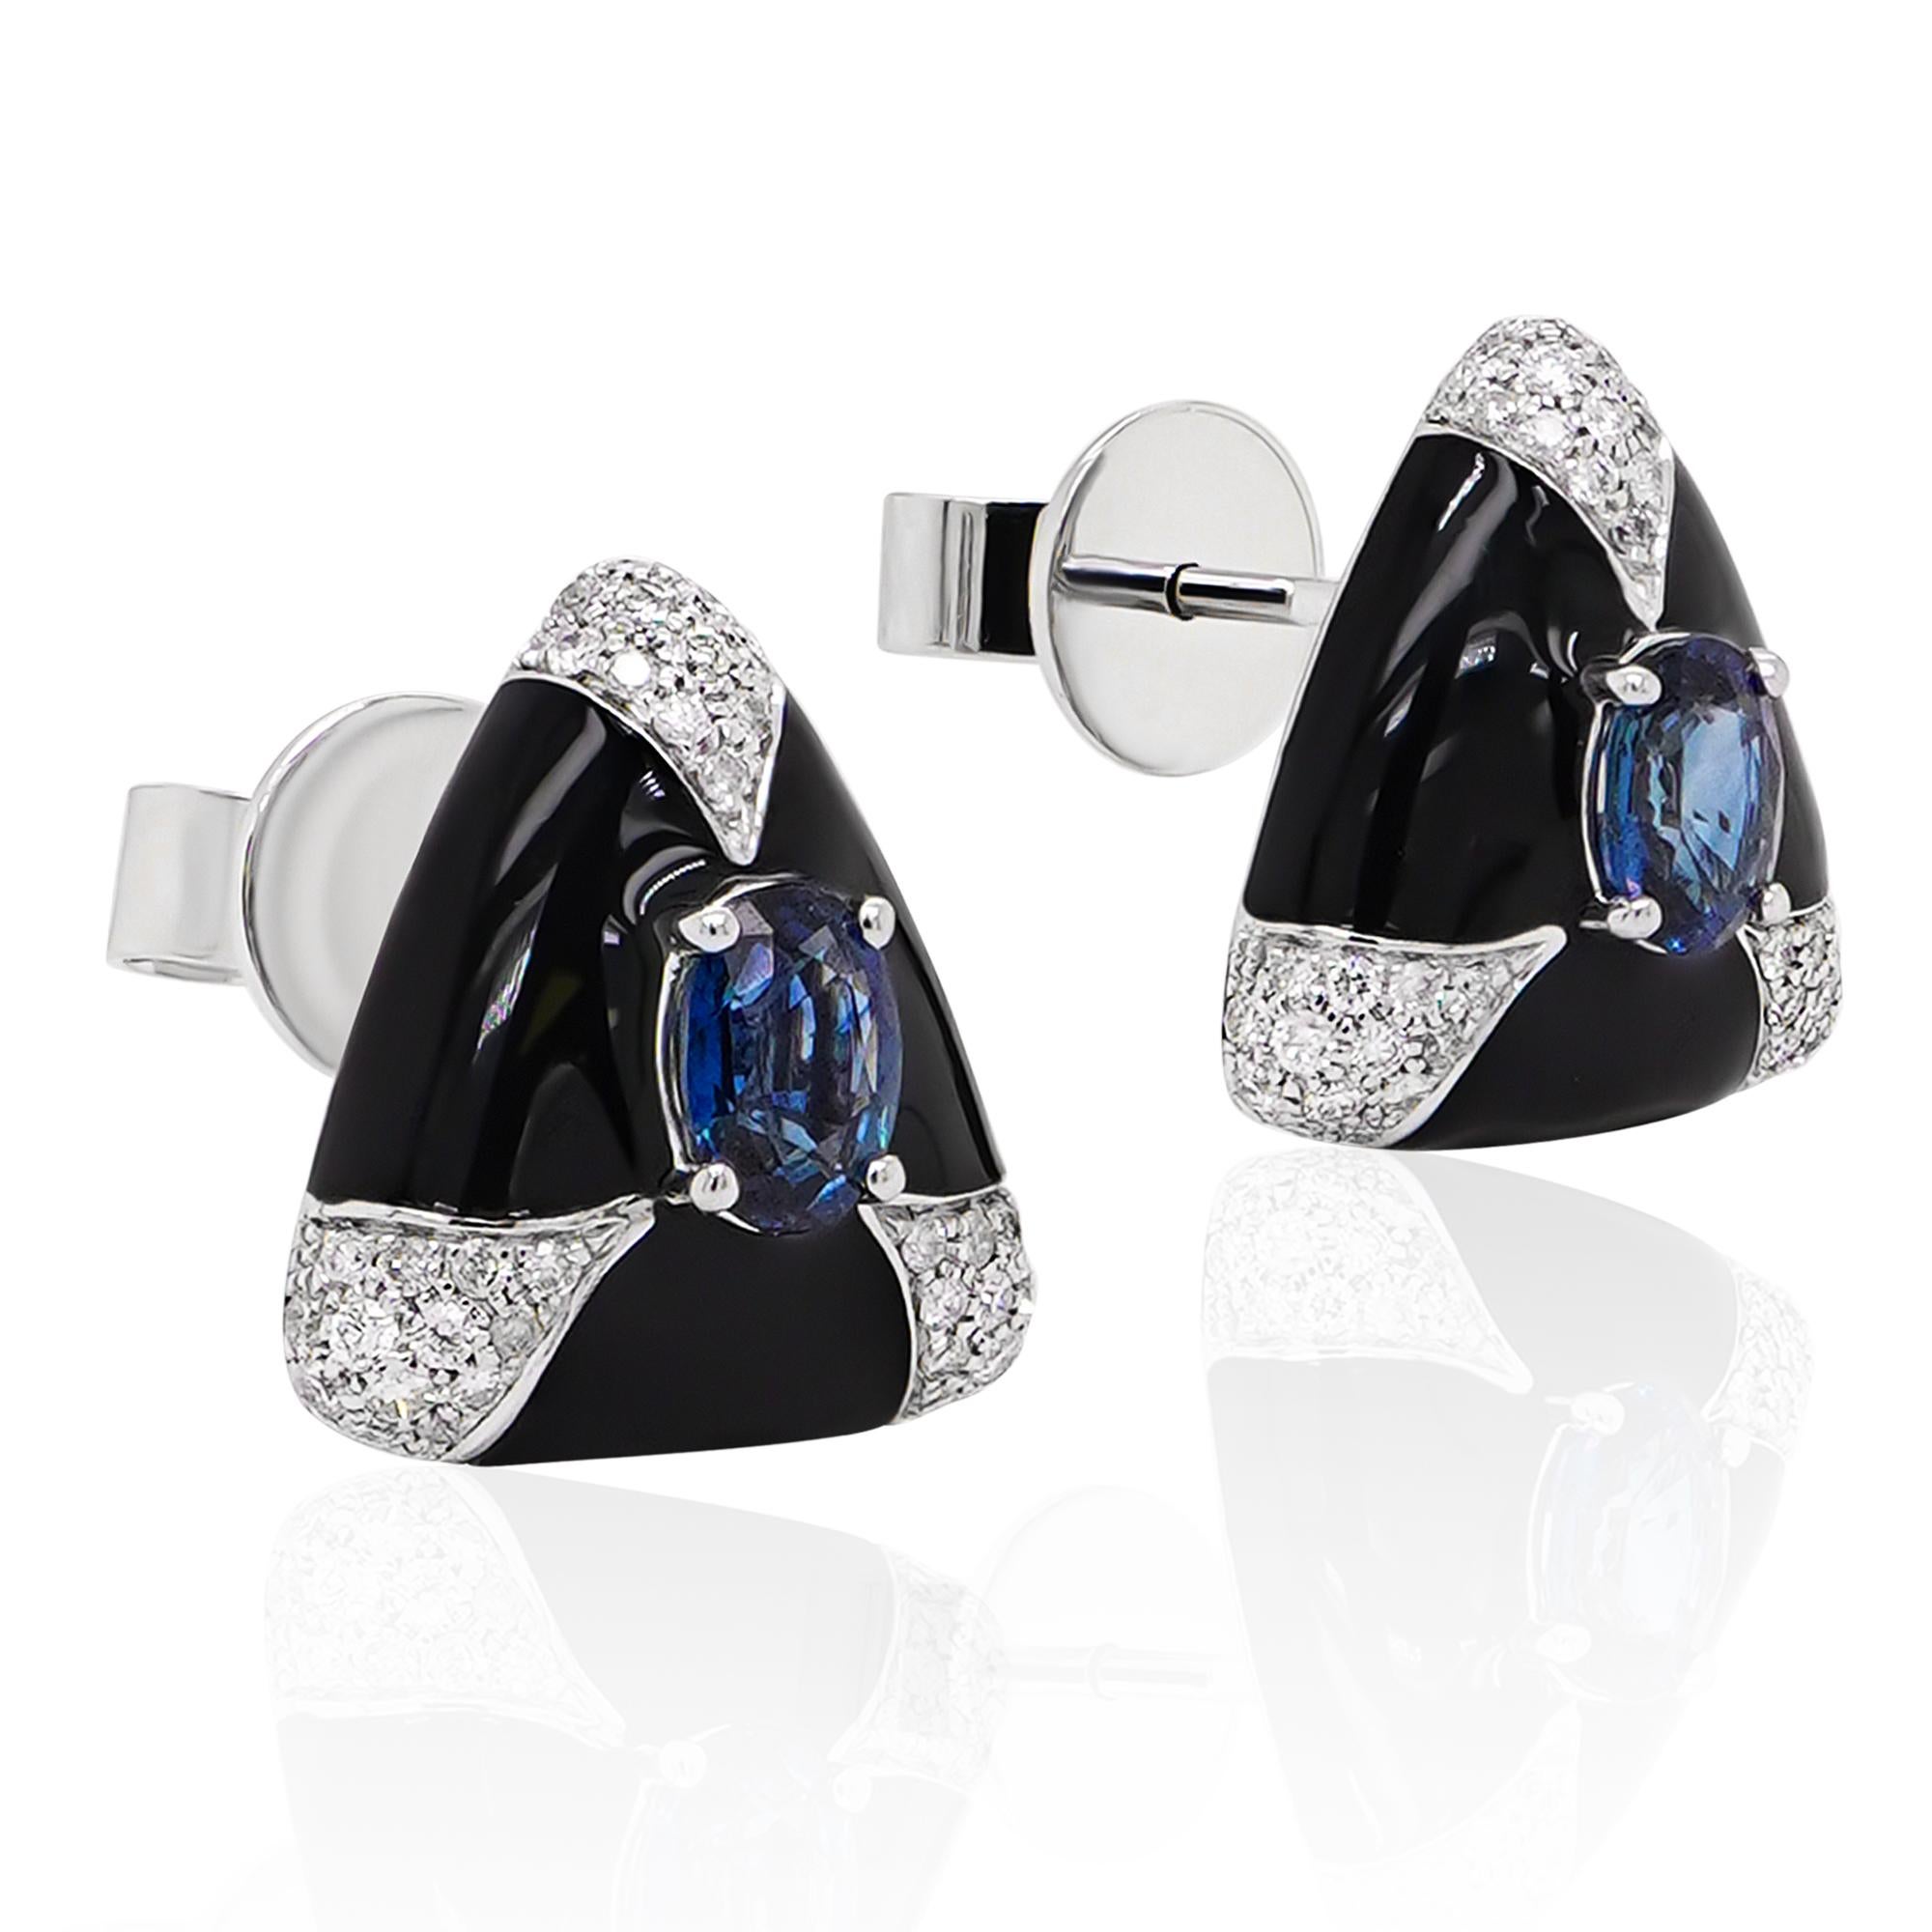 0.69 carat vivid blue sapphire are set with 0.25 carat of white round brilliant diamond set in 18K gold. The earring has been made with artic ice enamel which gives it a very edgy feel. The details of the diamond are mentioned below:

Color: